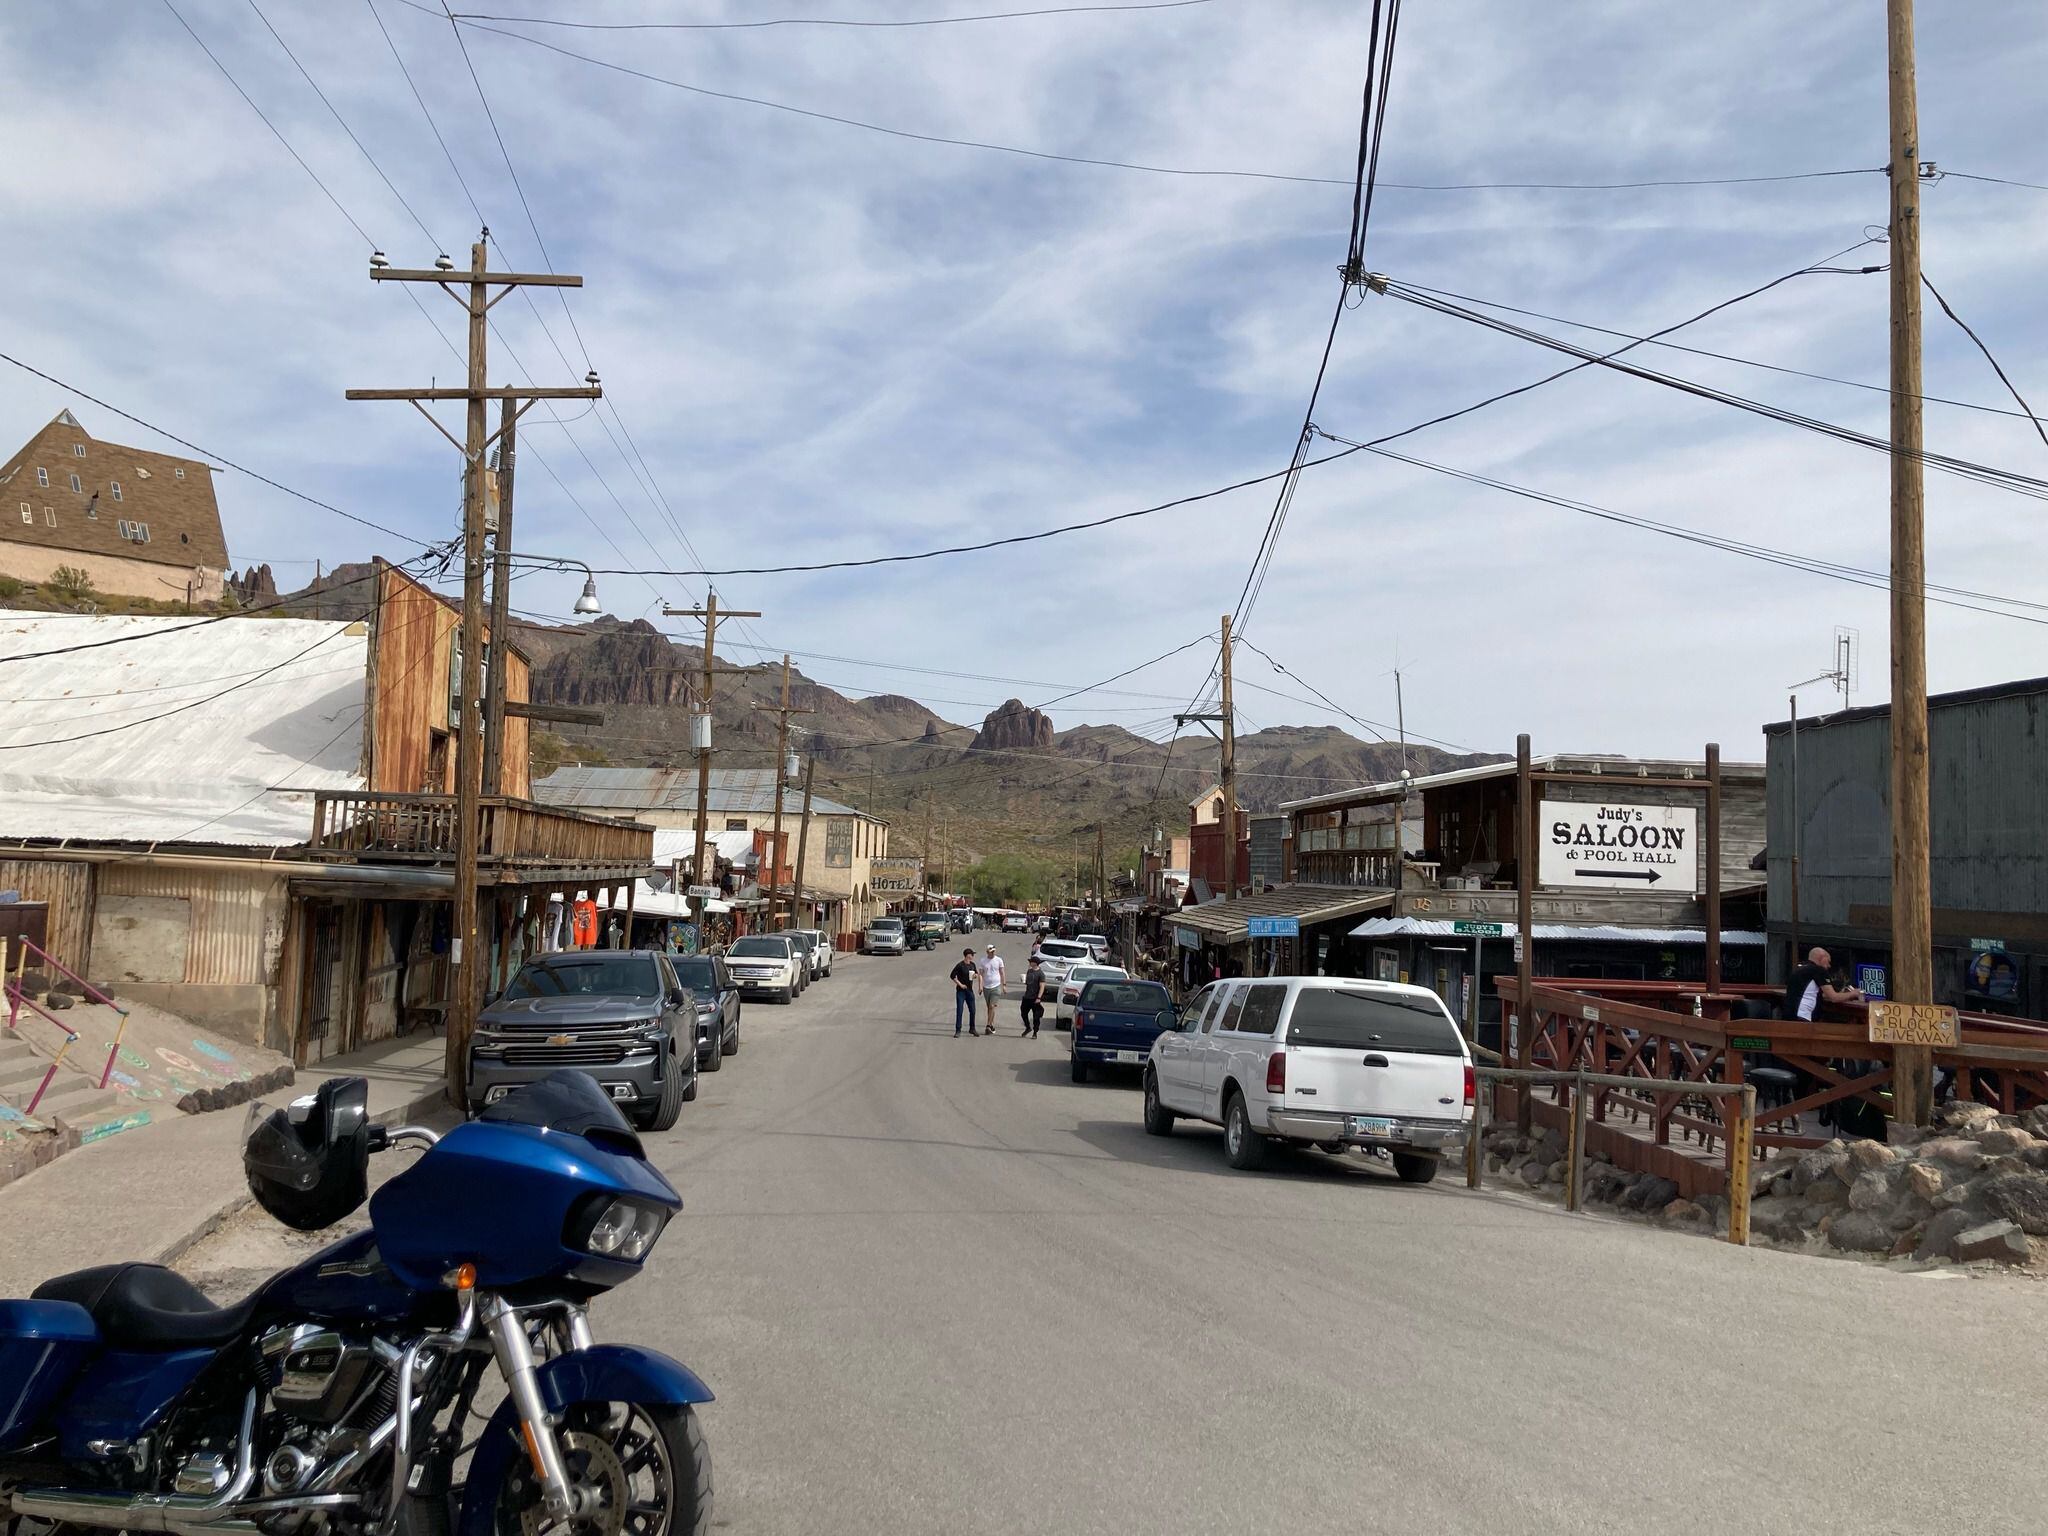 A view of historic downtown Oatman, Az  - a small mining camp that was put on the map when two prospectors struck a $10 million gold find in 1915.